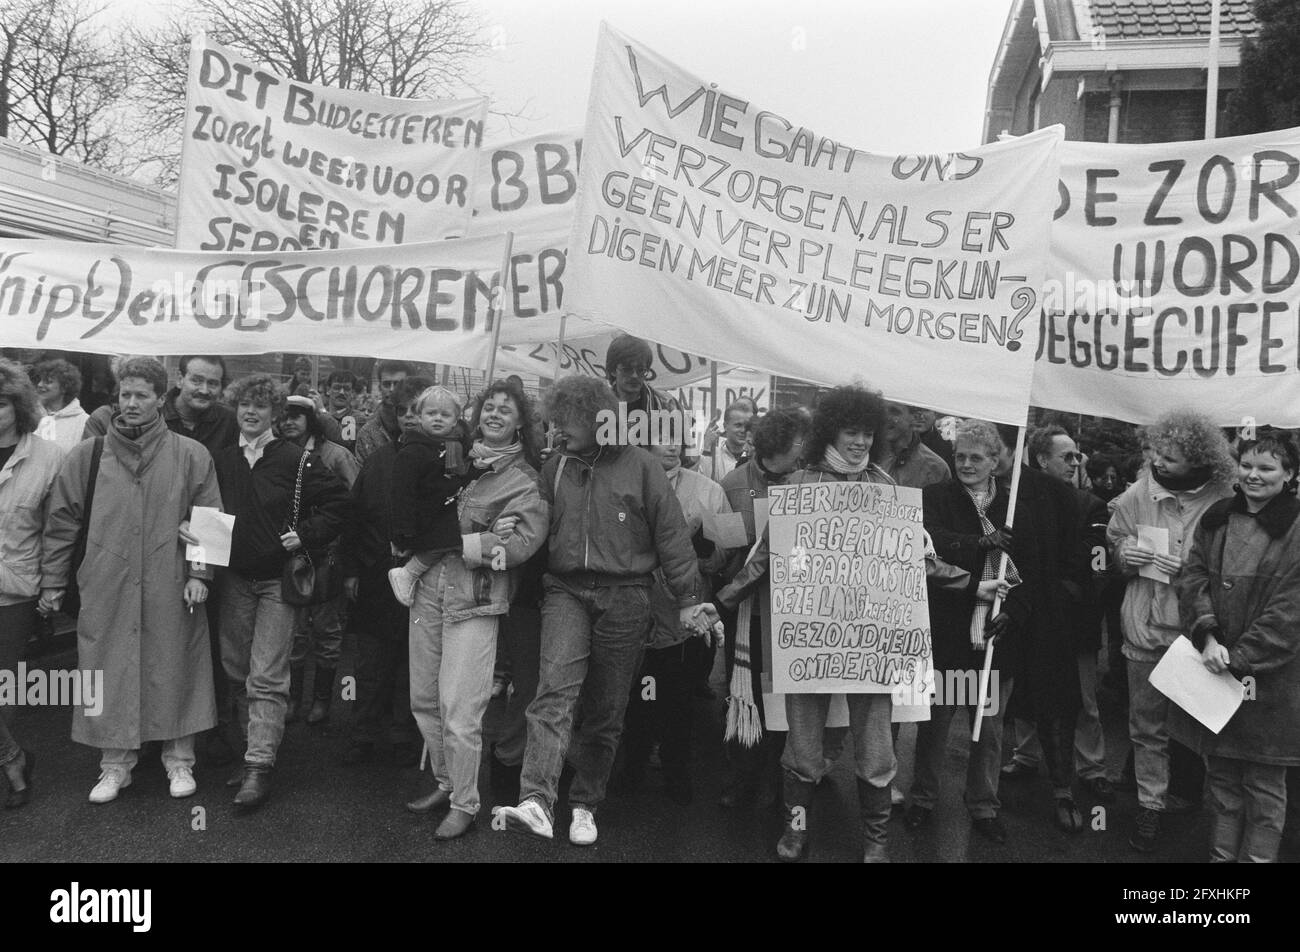 Employees Delta Hospital Poortugaal march in demonstrative march to protest meeting during work stoppage in protest of budget cuts, February 27, 1987, PURCHASE, protests, The Netherlands, 20th century press agency photo, news to remember, documentary, historic photography 1945-1990, visual stories, human history of the Twentieth Century, capturing moments in time Stock Photo